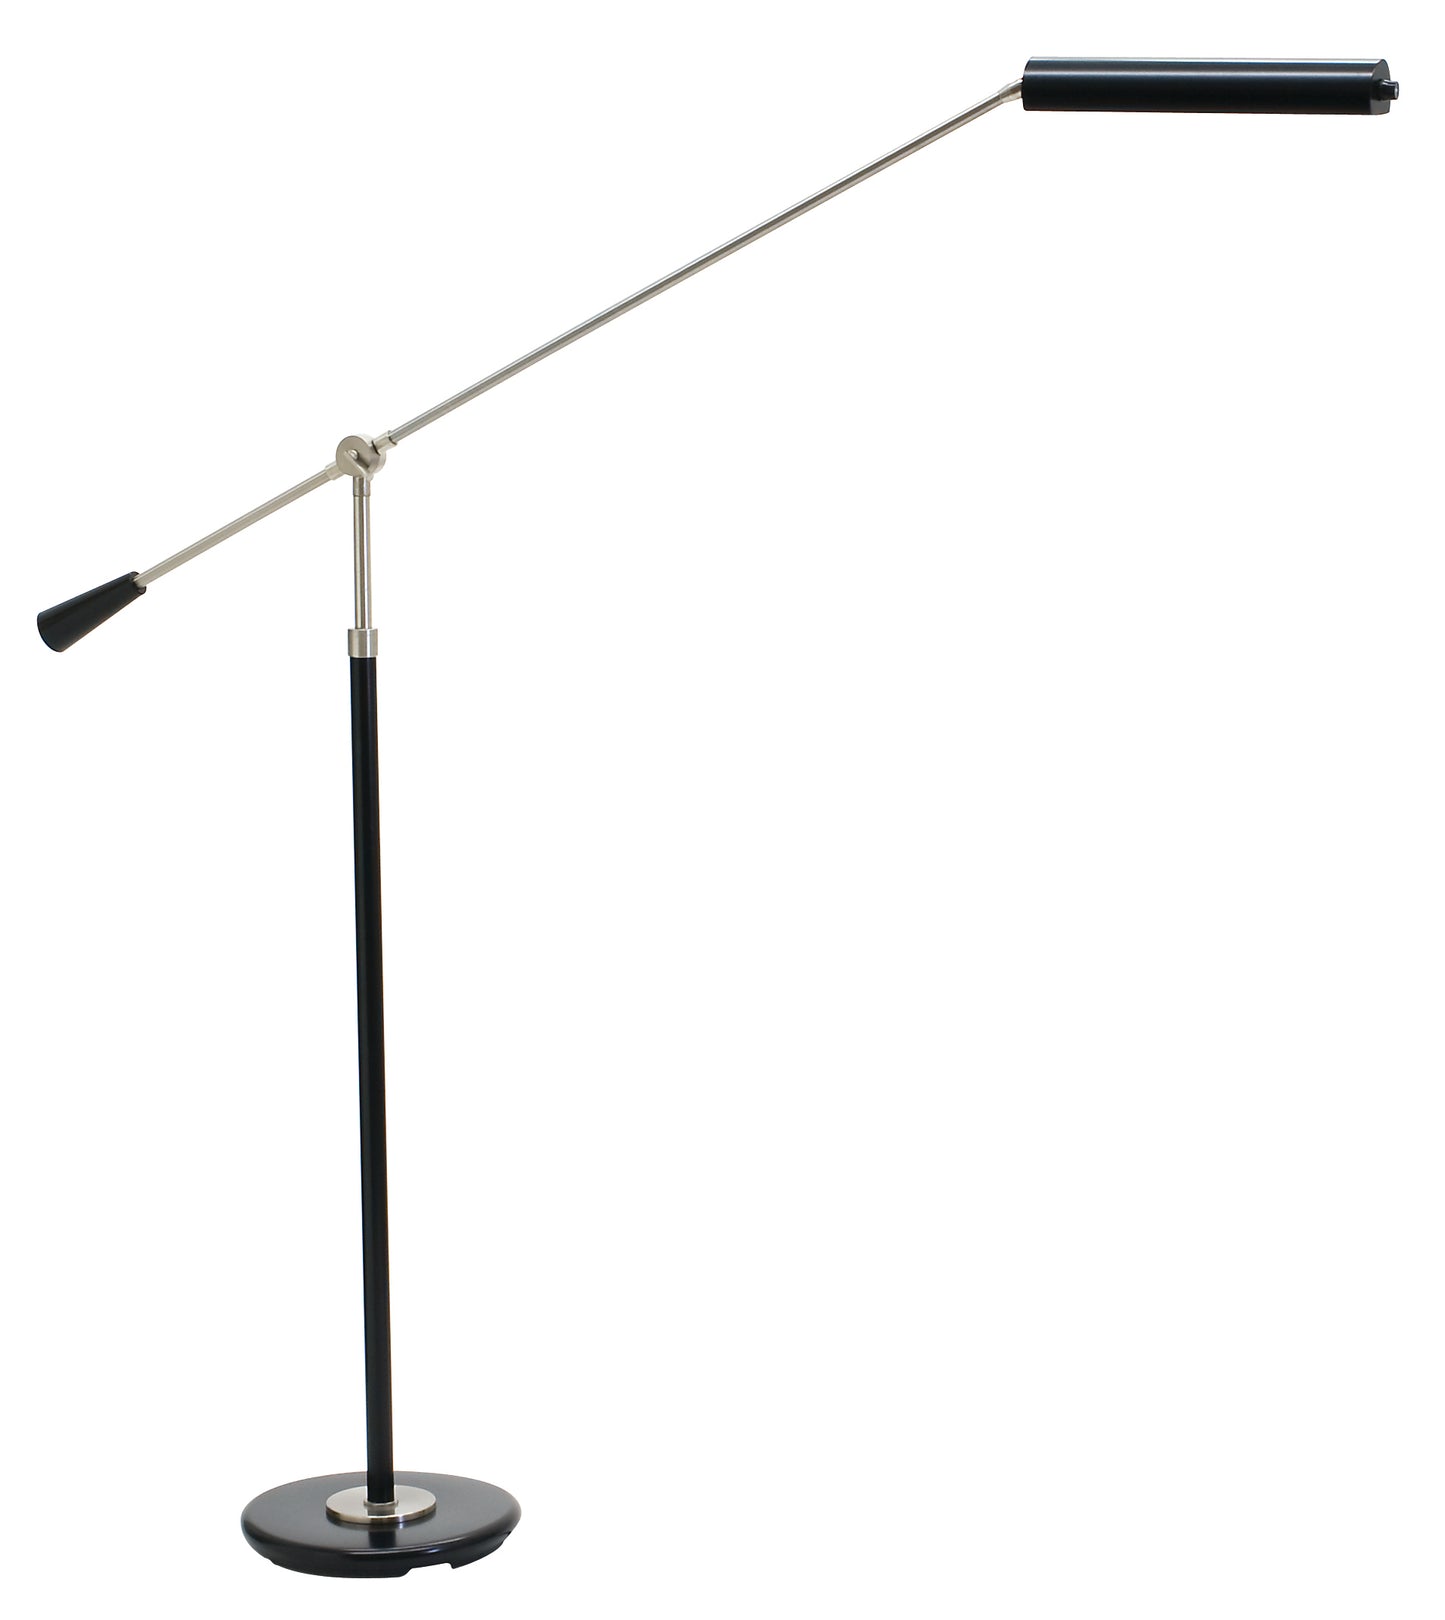 House of Troy Grand Piano Counter Balance LED Floor Lamp in Black with Satin Nickel Accents PFLED-527